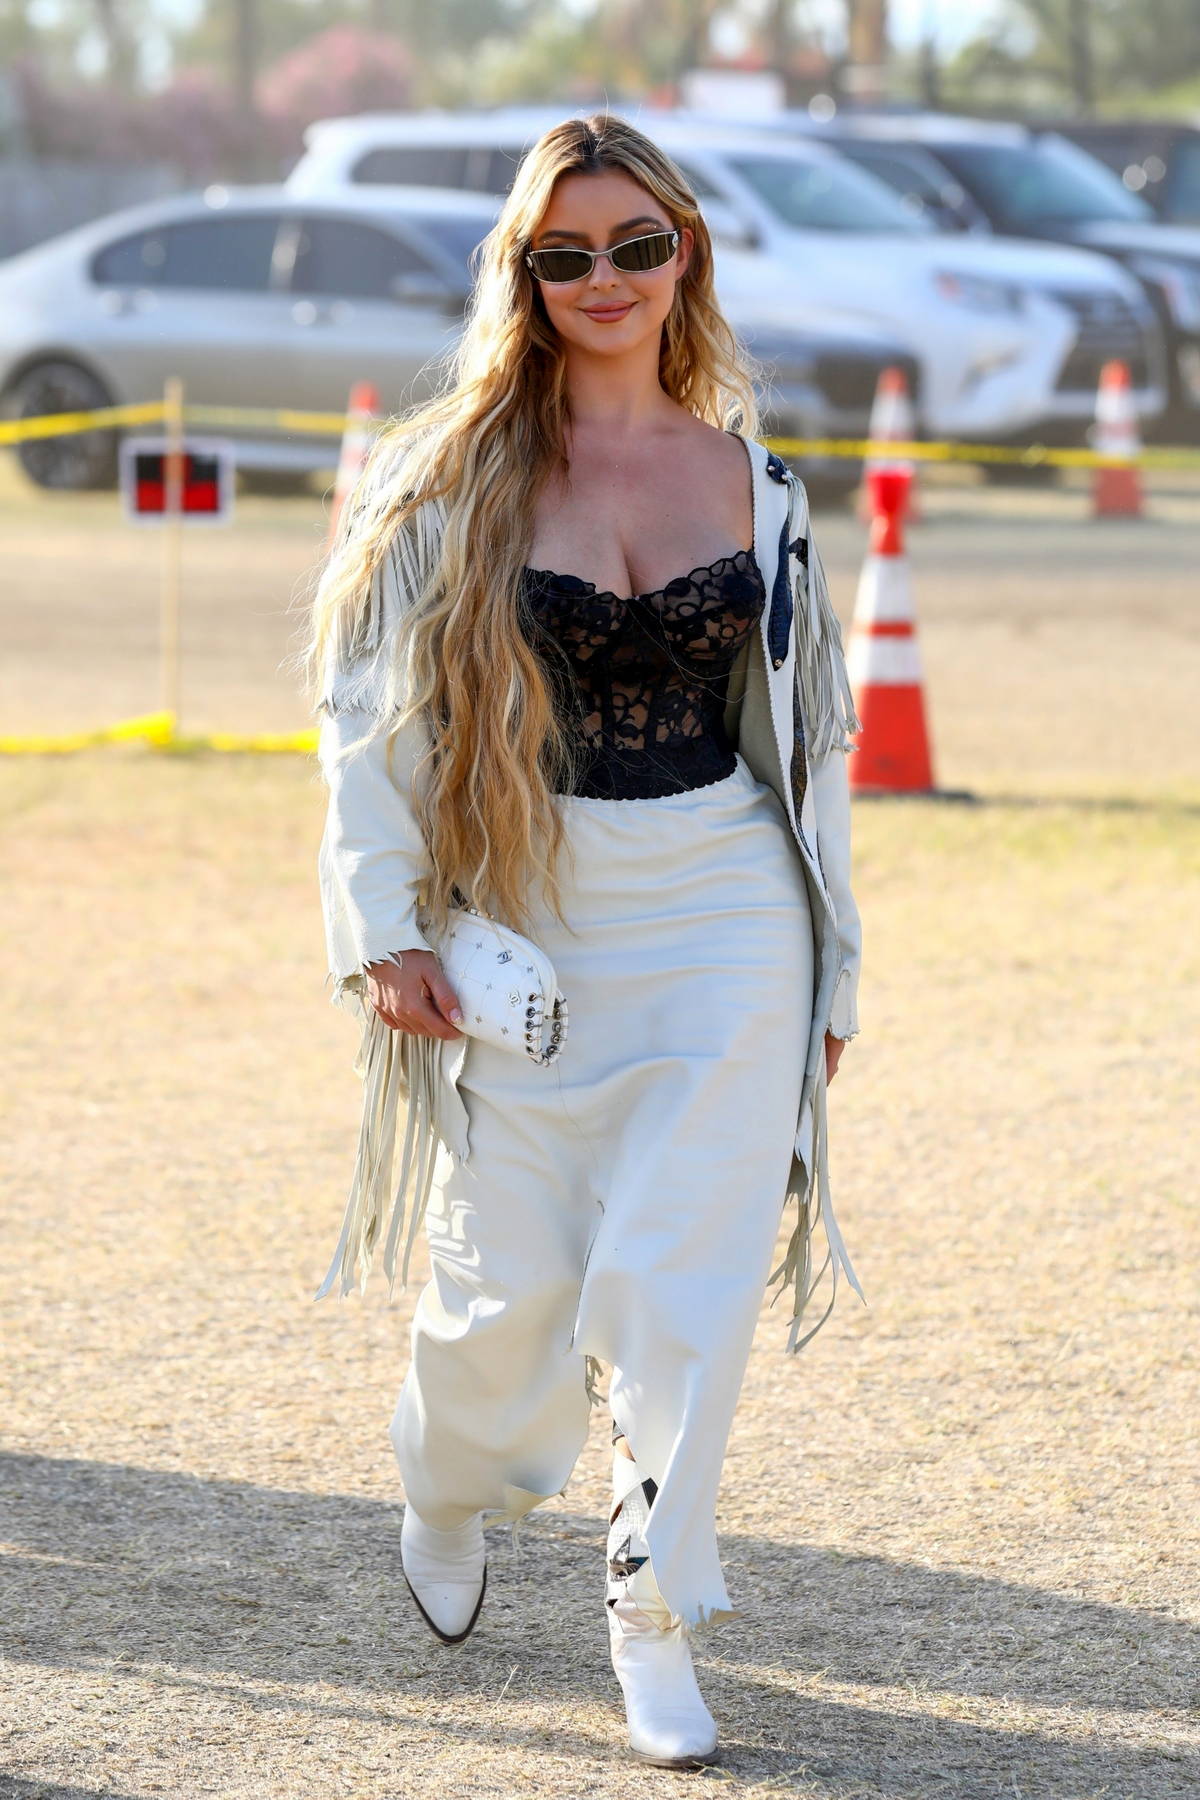 https://www.celebsfirst.com/wp-content/uploads/2022/04/demi-rose-stuns-in-a-plunging-corset-top-while-attending-week-2-day-3-of-2022-coachella-in-indio-california-240422_5.jpg